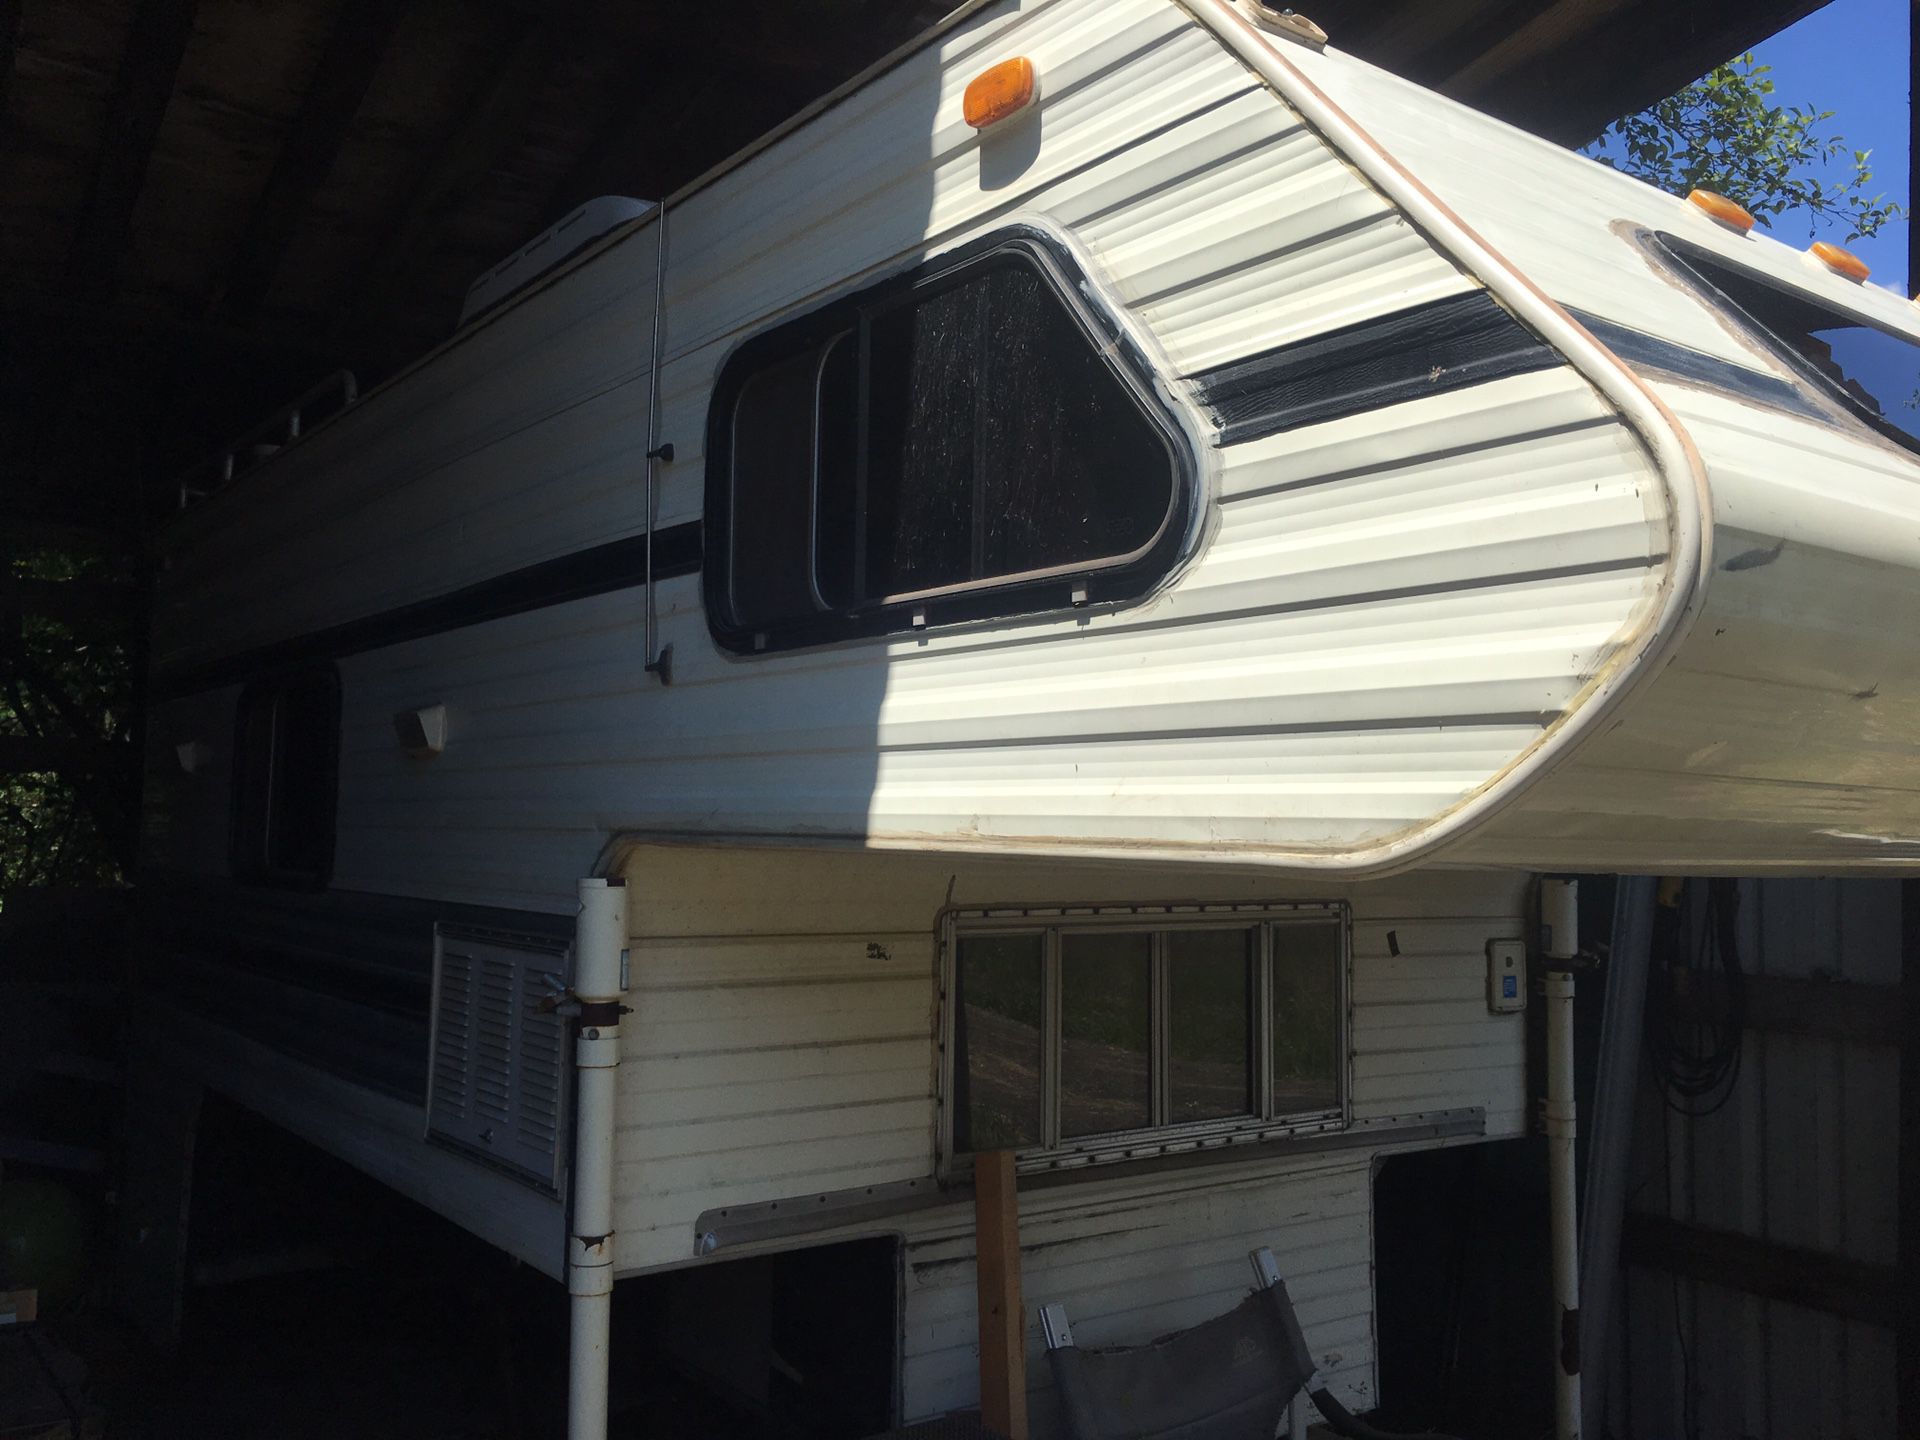 1983 Lance Camper - just in time for hunting season!